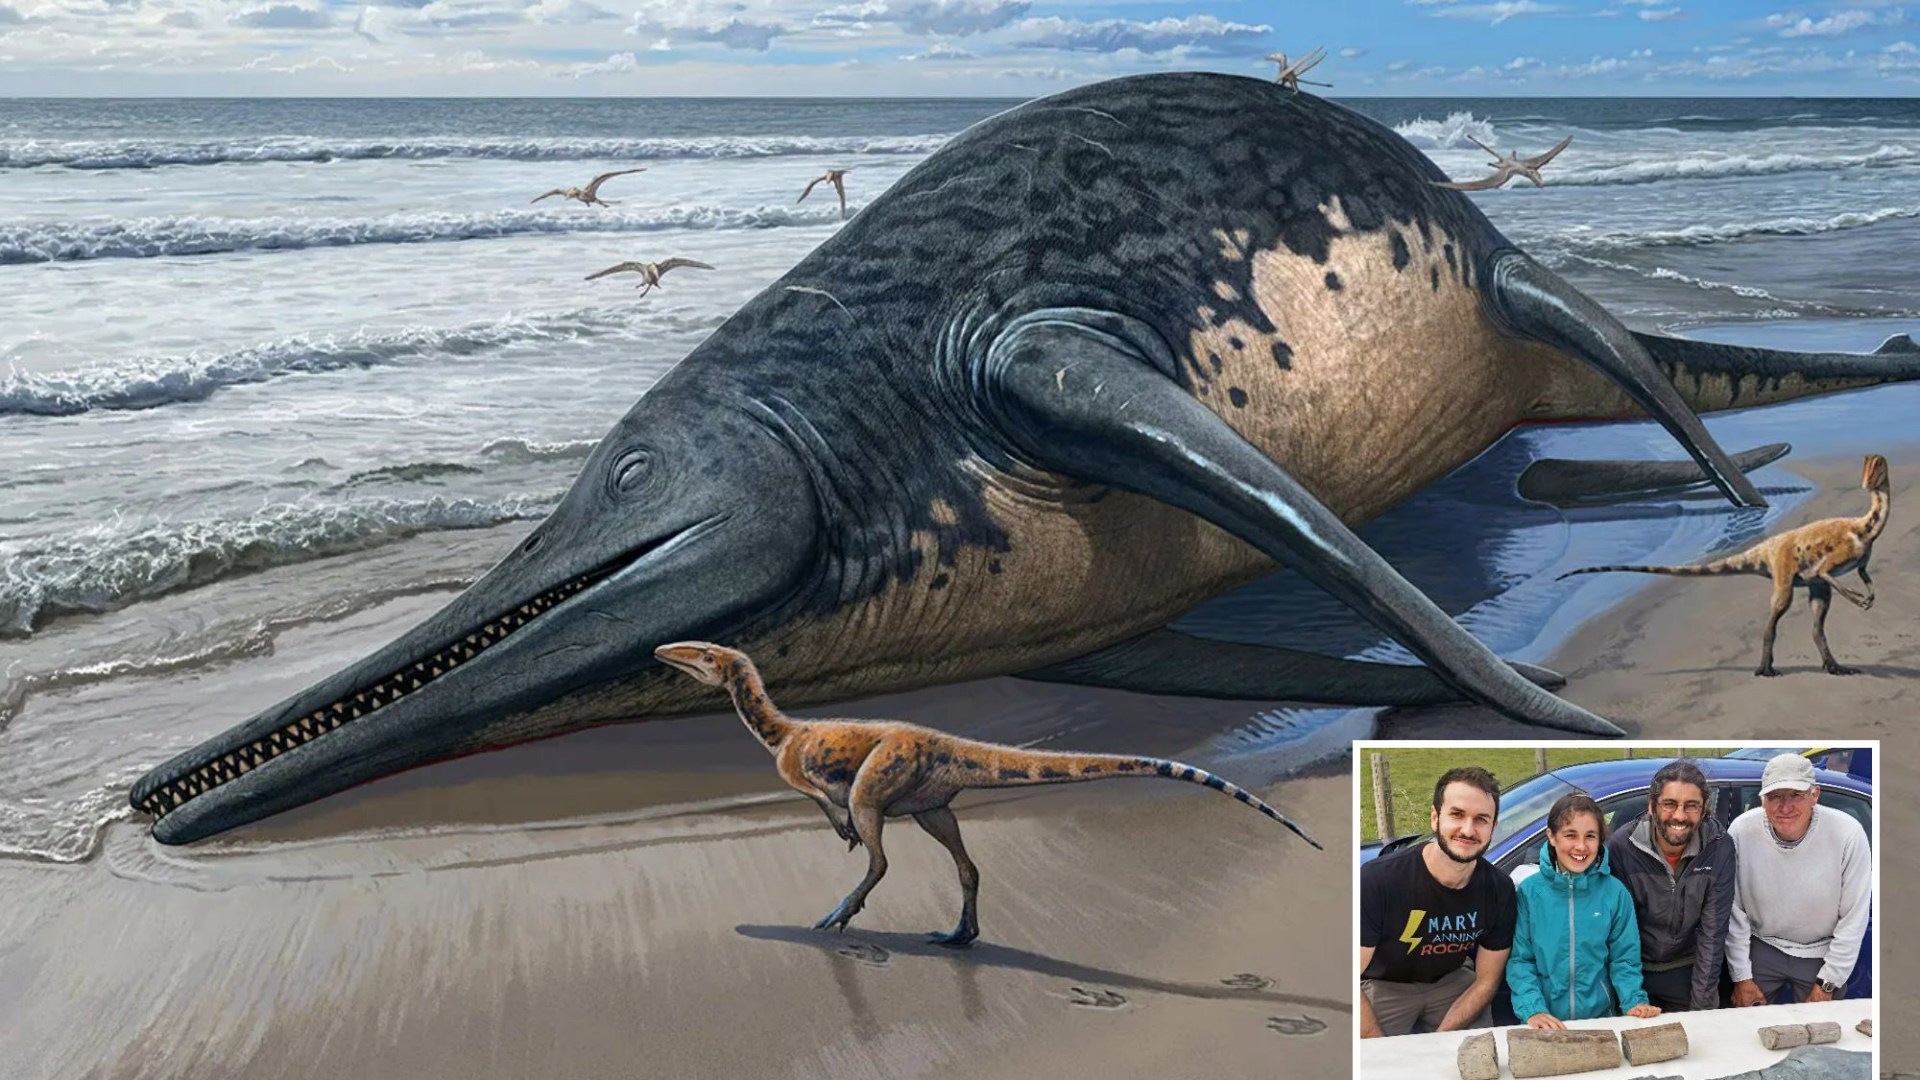 Meet the Colossal Prehistoric Sea Beast Unearthed by an 11-Year-Old on a Somerset Beach – Longer Than Two Buses!